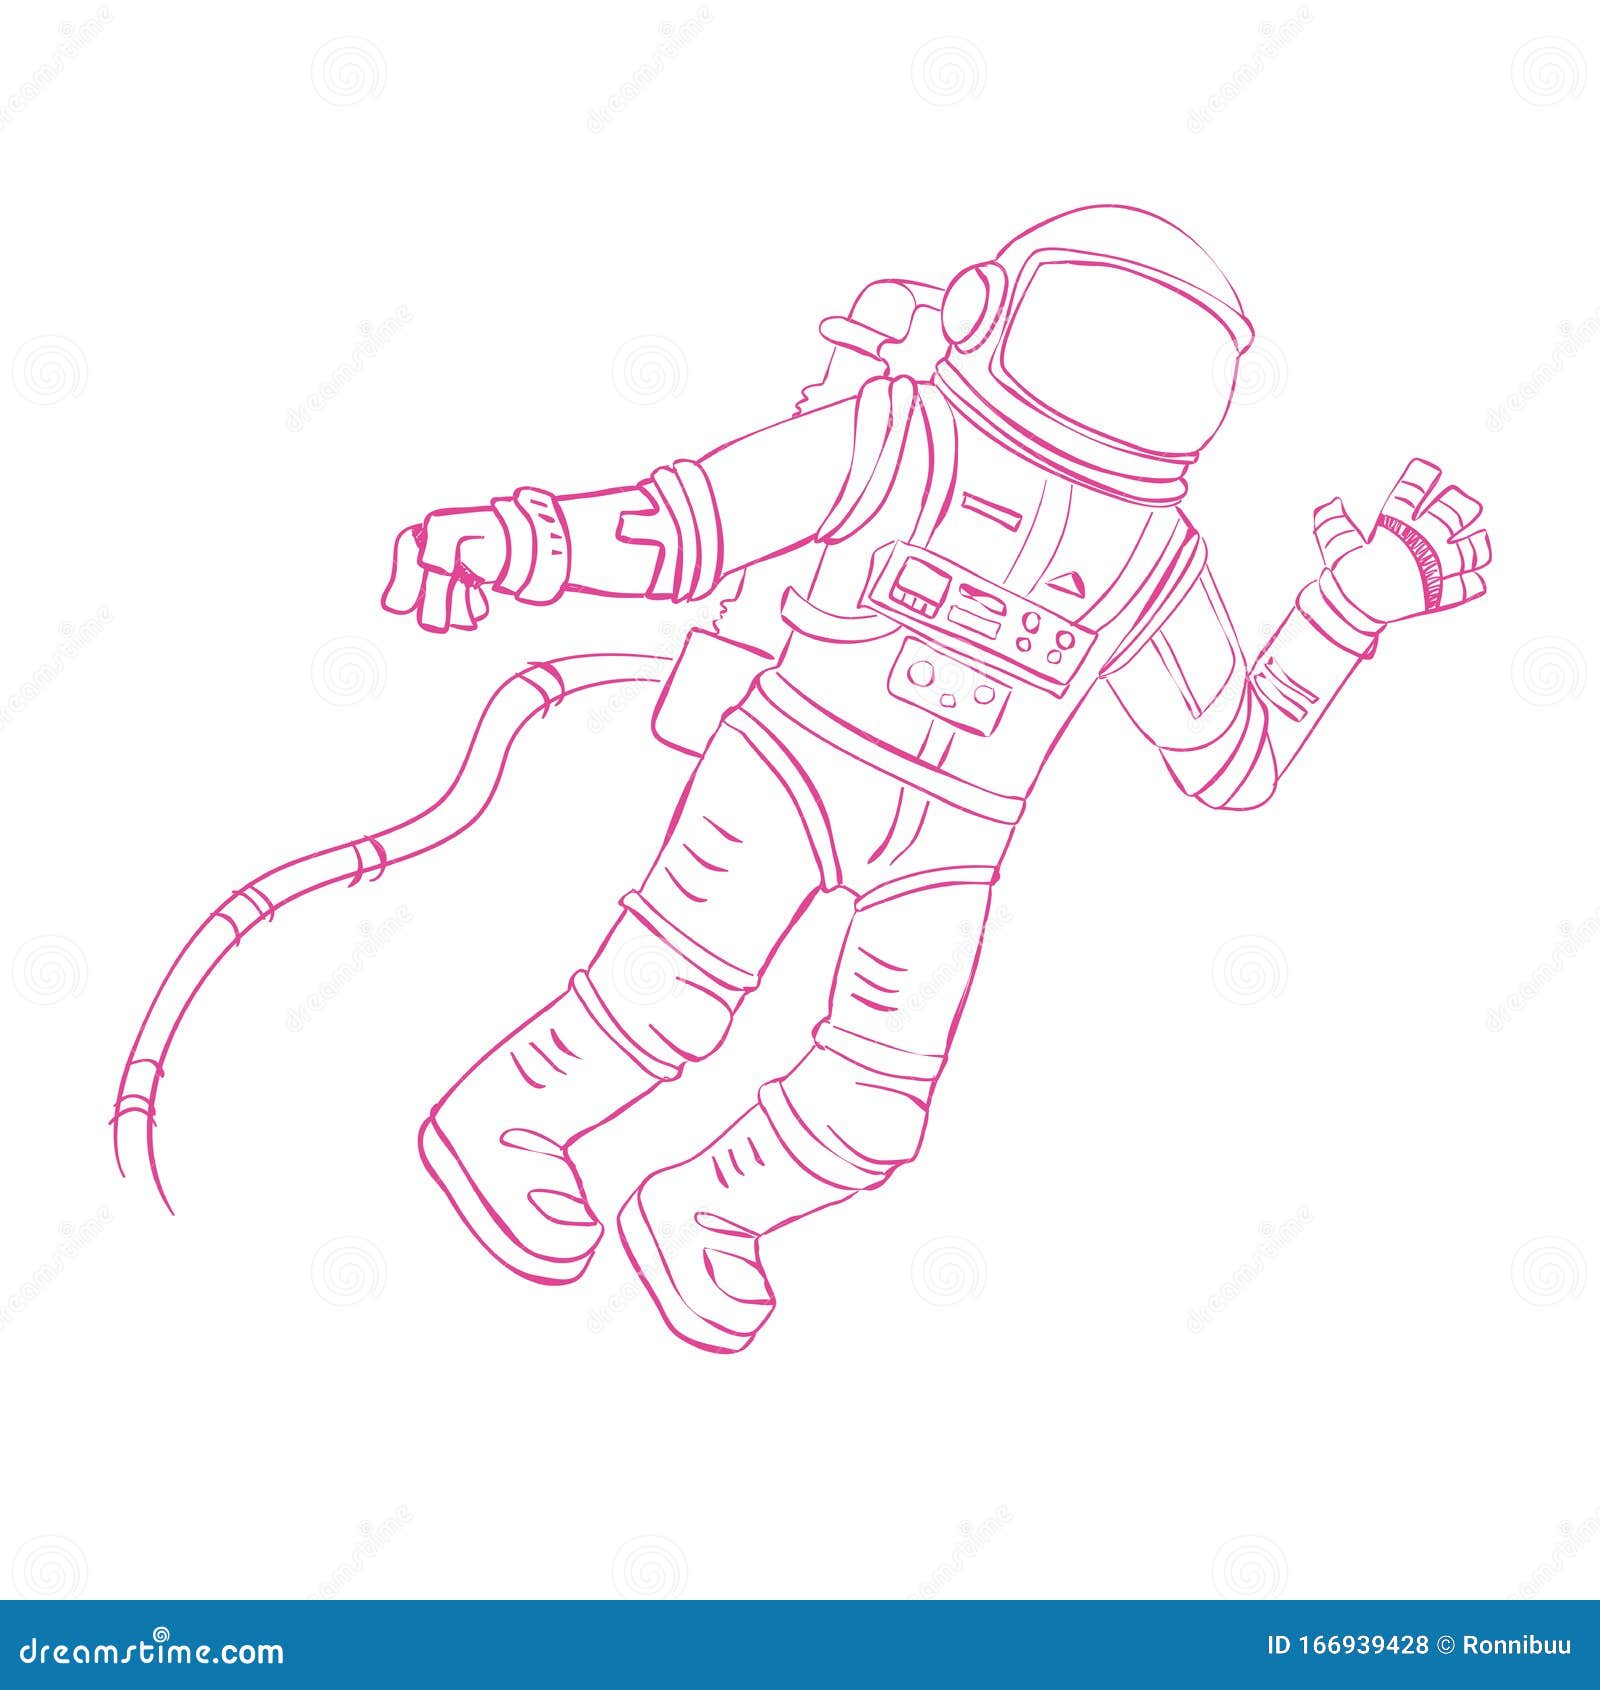 Astronaut Drawing High-Res Vector Graphic - Getty Images